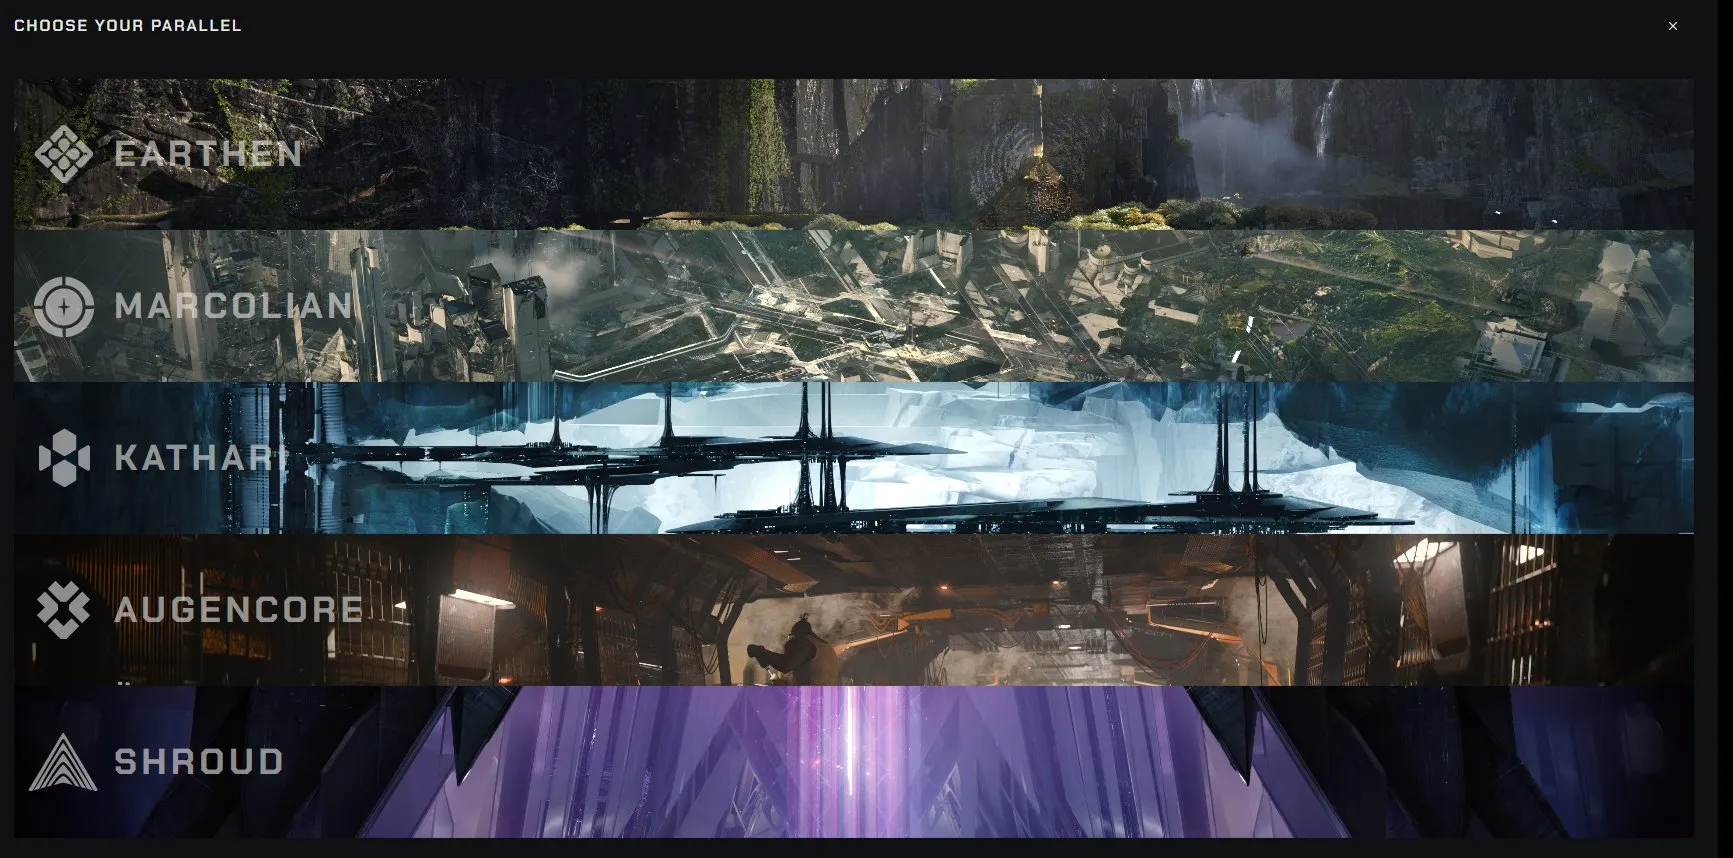 This photo showcases the different parallel universes in Parallel. Each universe has its own unique story, but they are all interconnected in the game.